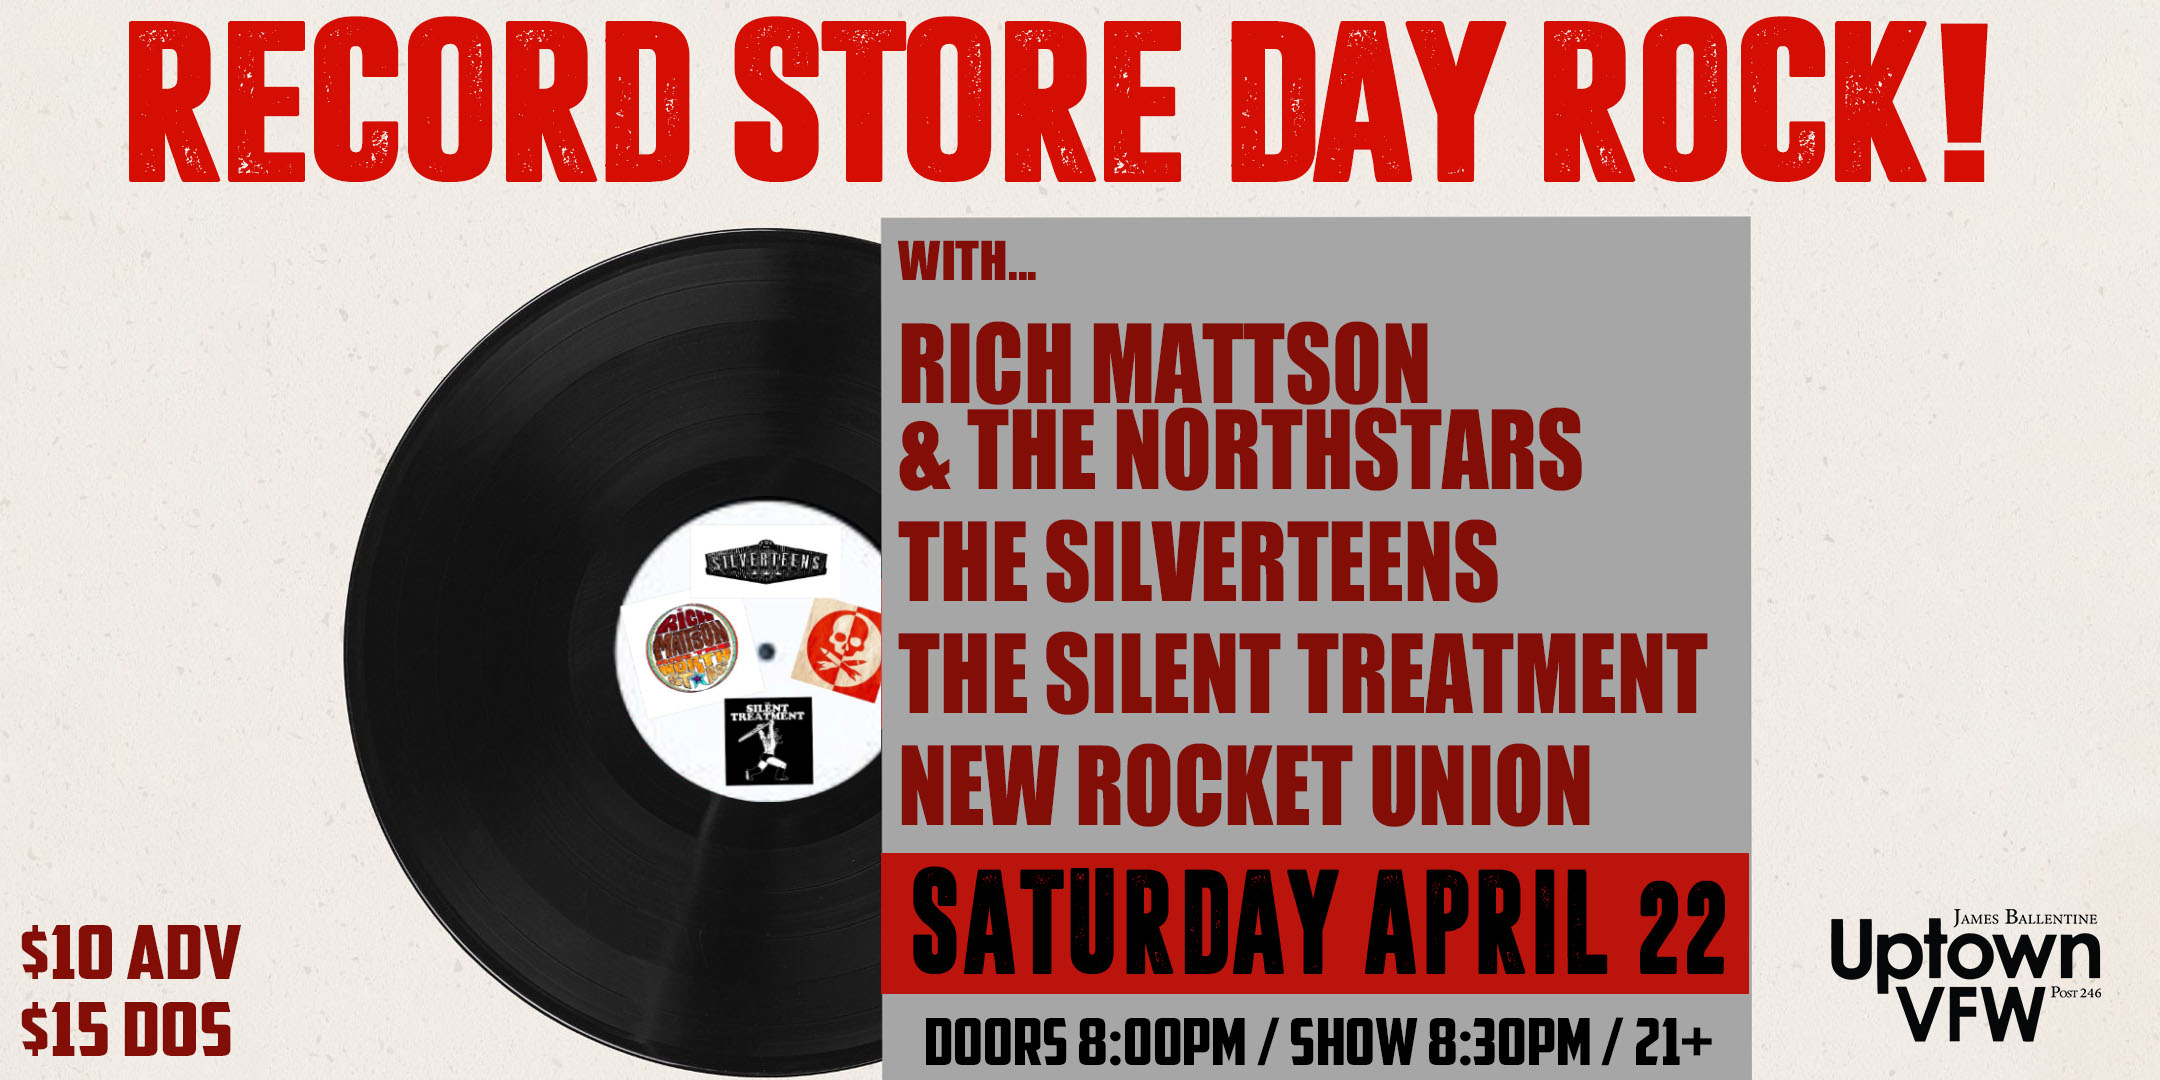 Rich Mattson & The Northstars The Silverteens The Silent Treatment New Rocket Union Saturday, April 22 James Ballentine "Uptown" VFW Post 246 Doors 8:00pm :: Show 8:30pm :: 21+ GA $10 ADV / $15 DOS NO REFUNDS